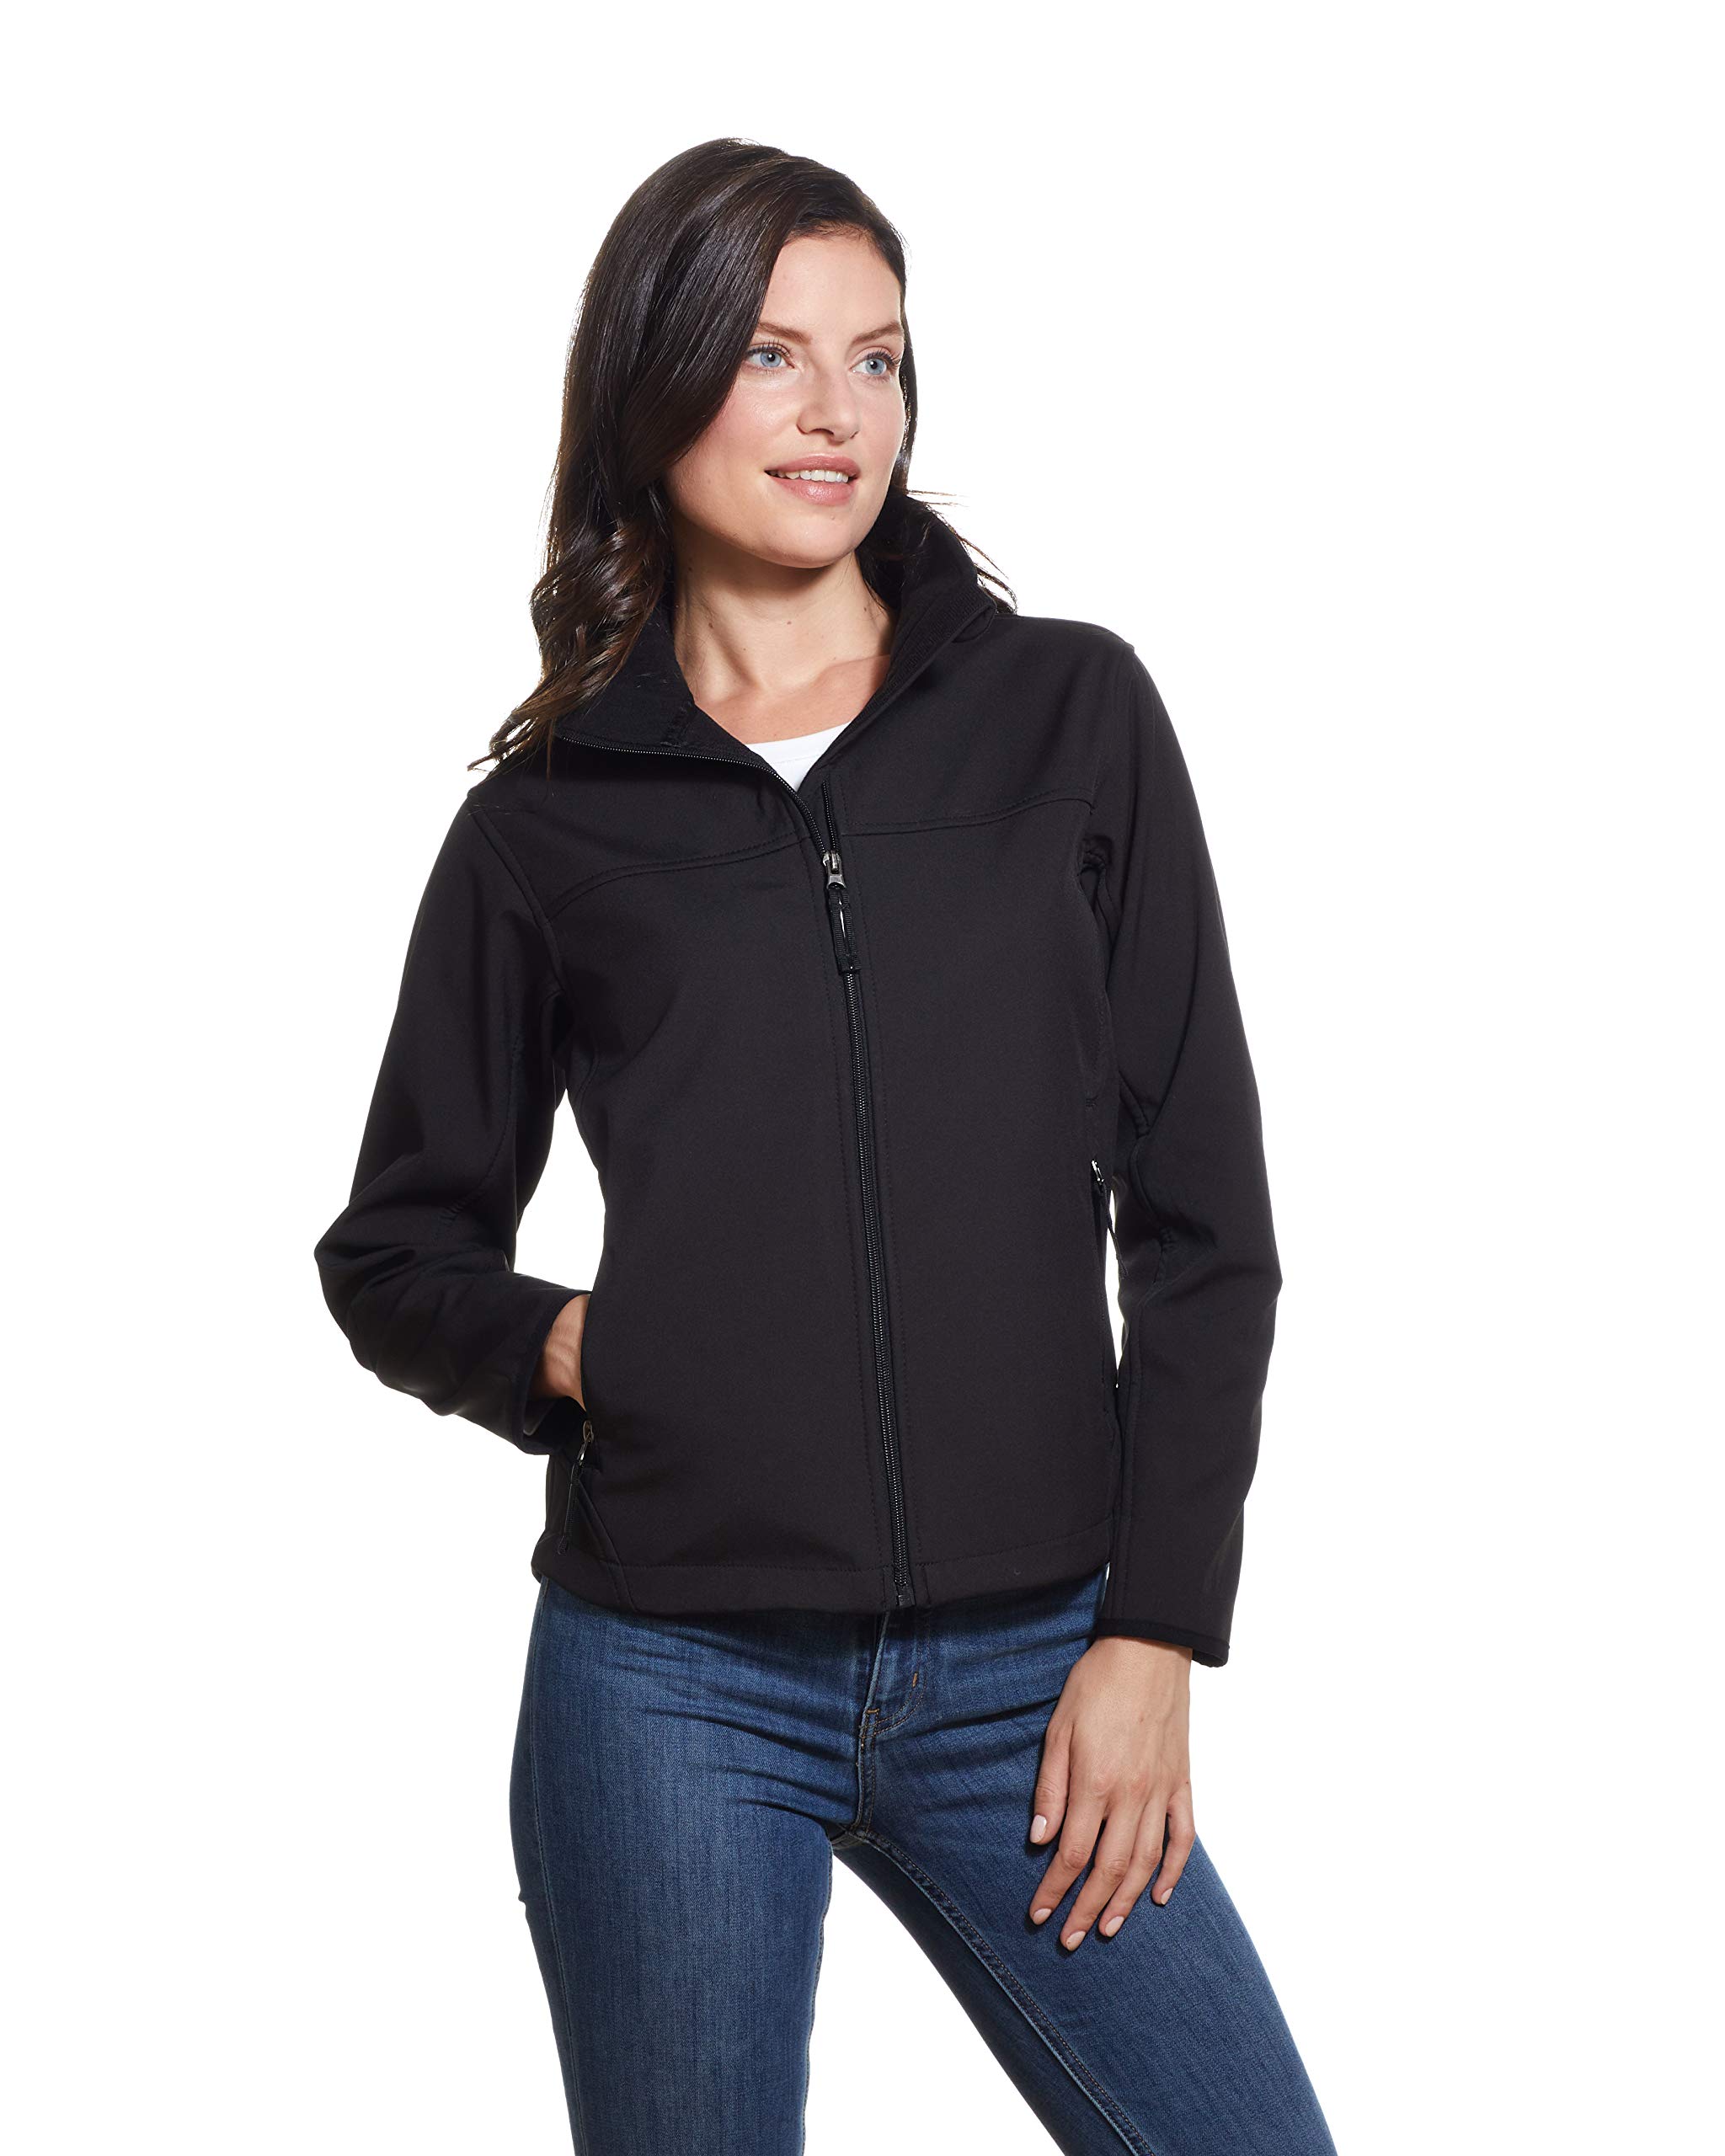 Weatherproof Womens Lightweight Water and Wind Resistant Soft Shell Jacket